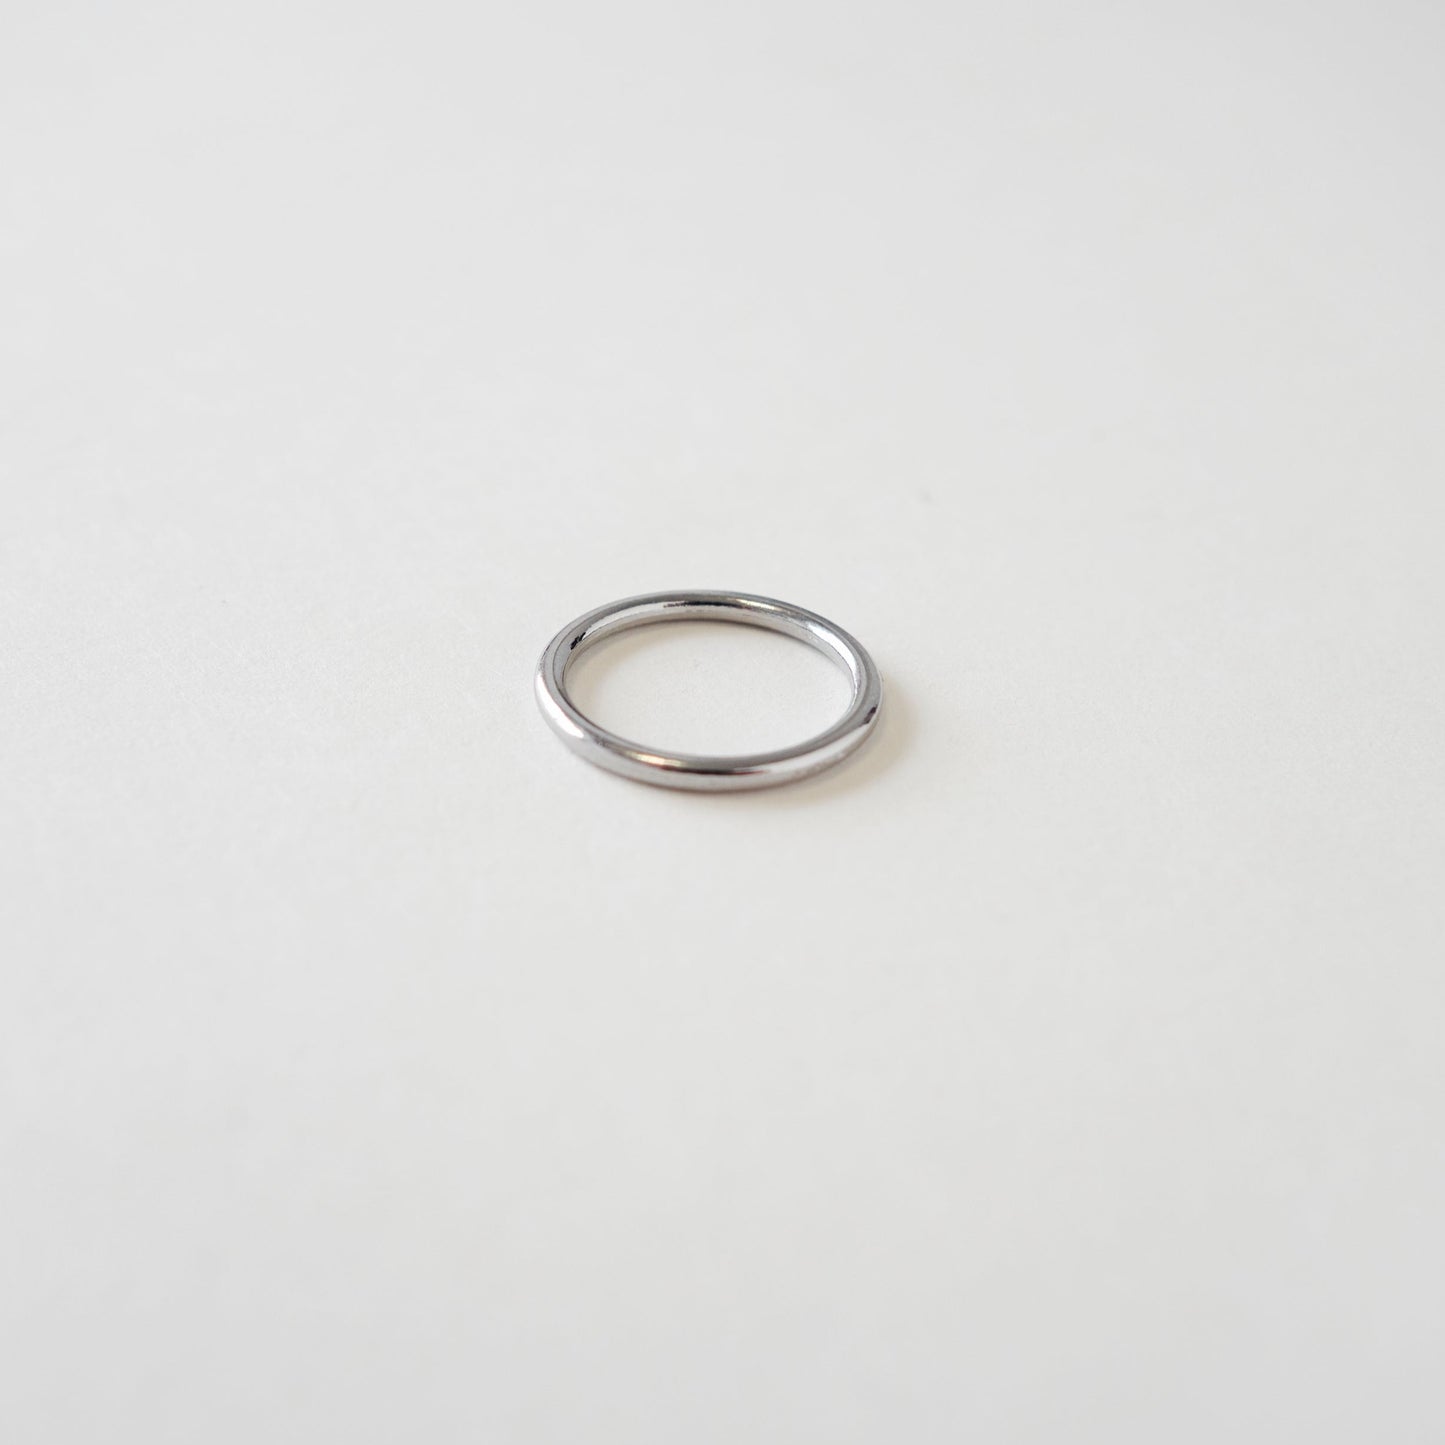 Ring for suspenders - 13mm